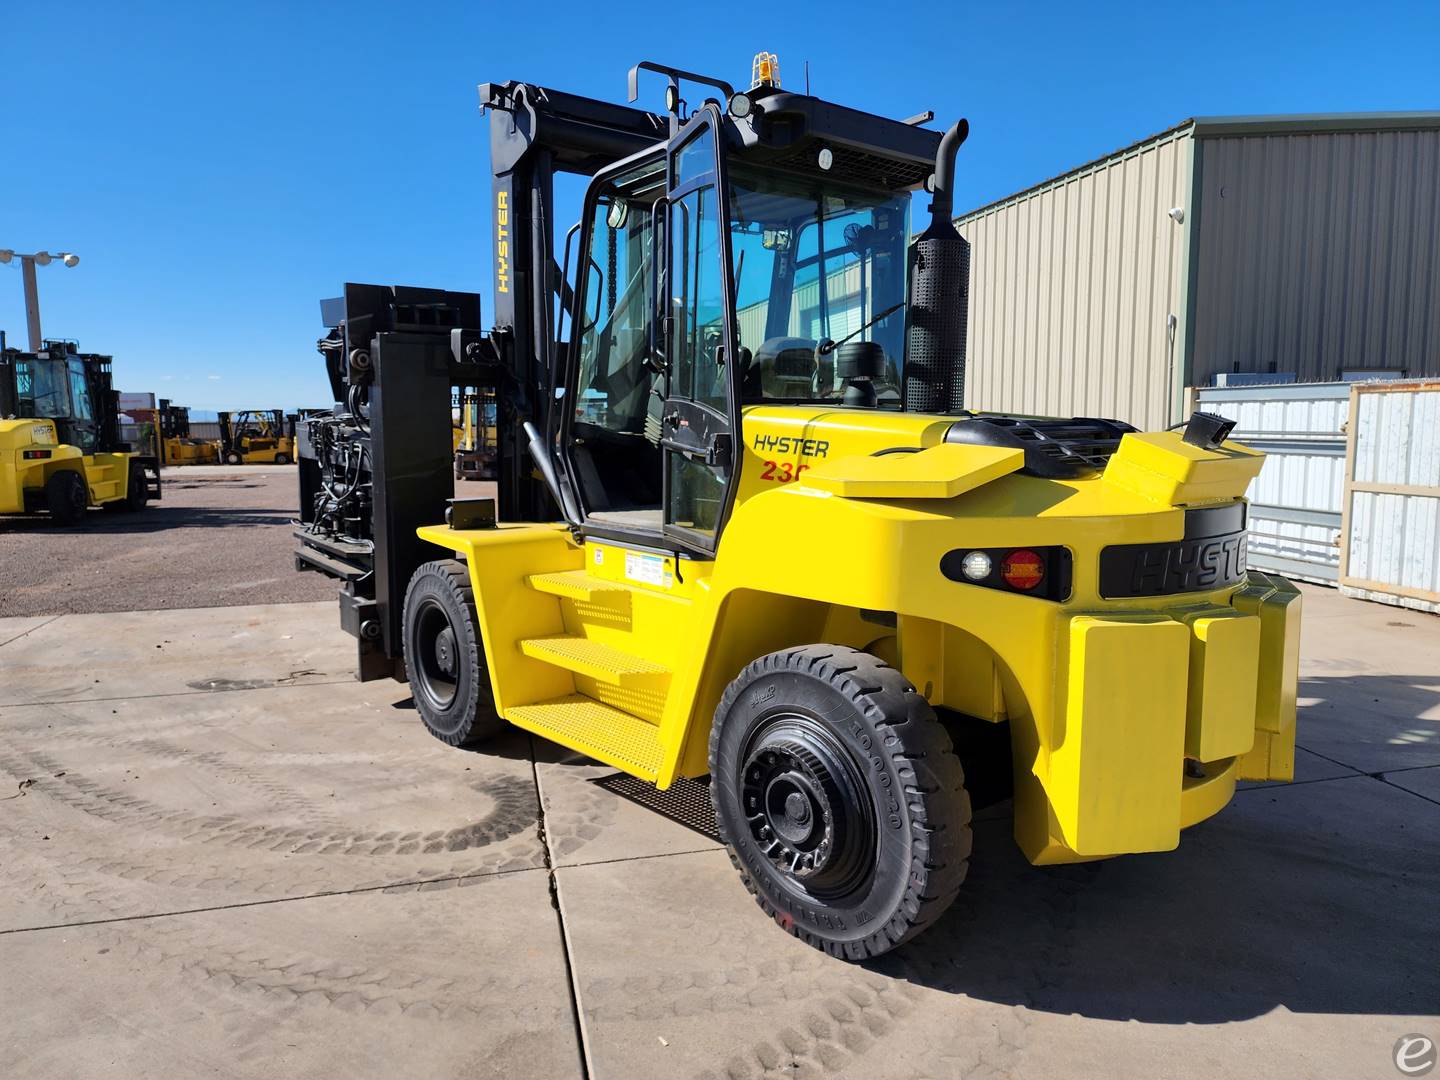 2013 Hyster H230HD2S